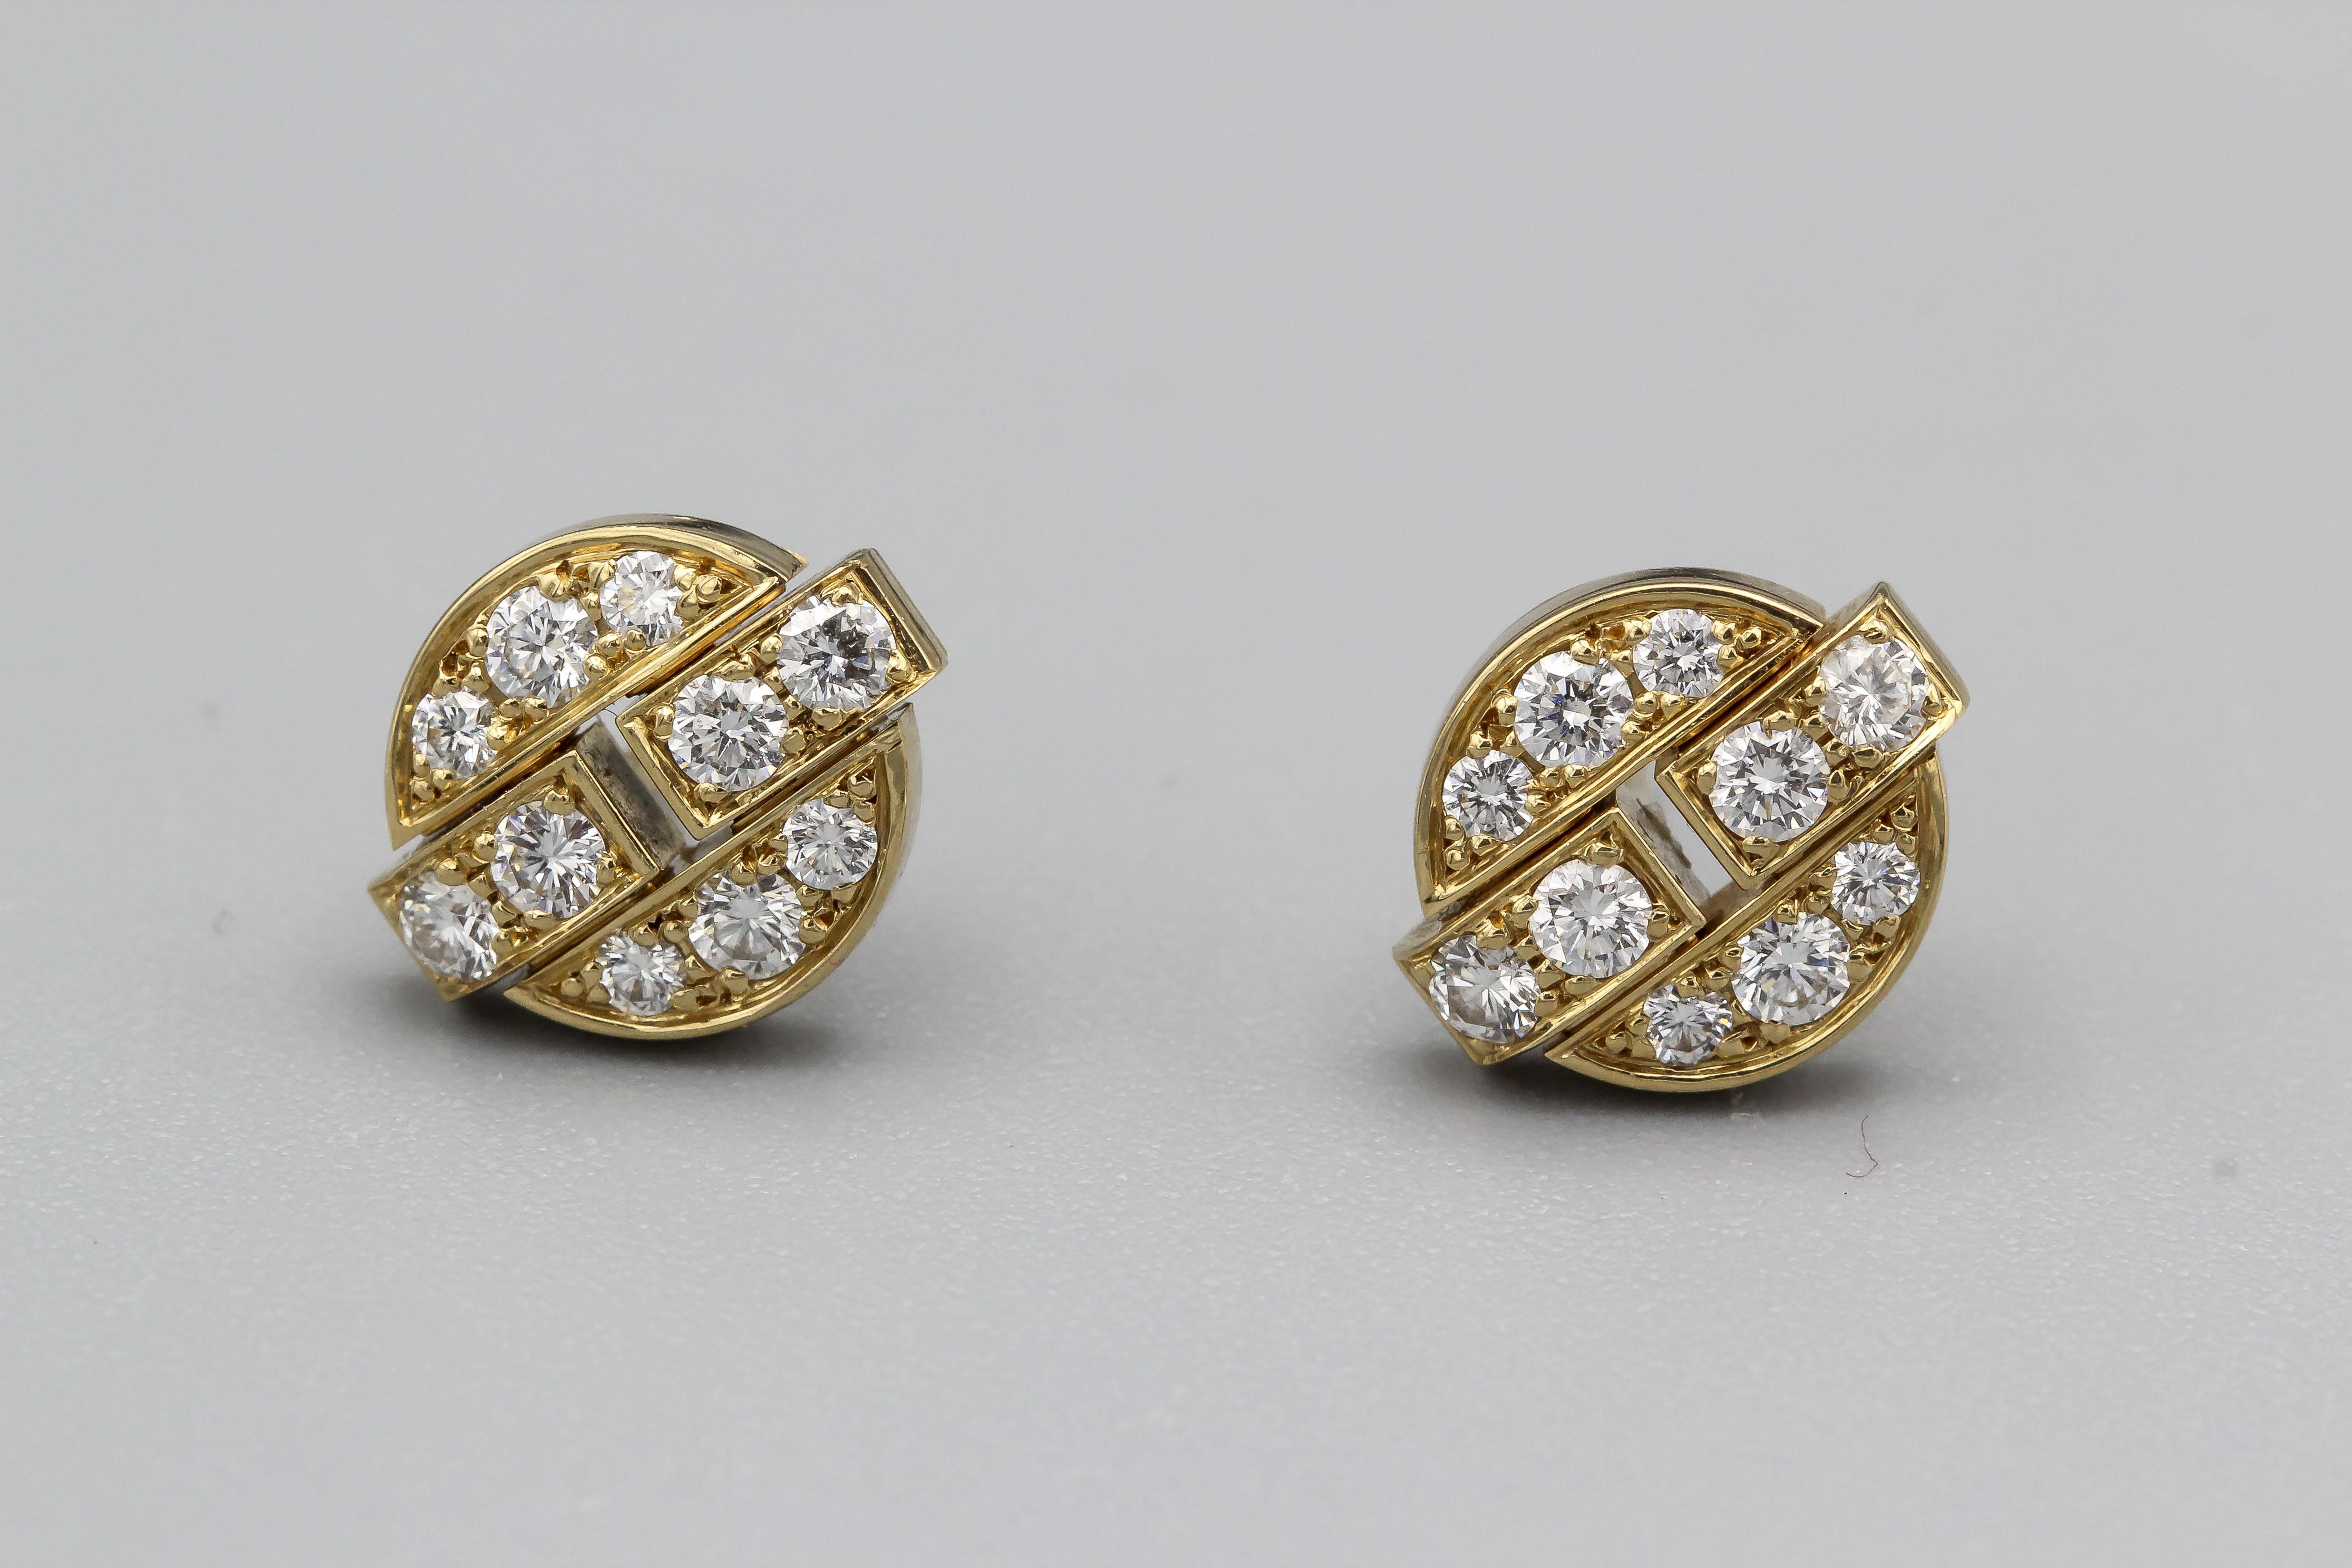 Introducing the Cartier Himalia Diamond 18 Karat Gold Stud Earrings— a resplendent fusion of elegance and brilliance that embodies Cartier's legacy of luxury and craftsmanship. These exquisite stud earrings are a tribute to the allure of the Himalia